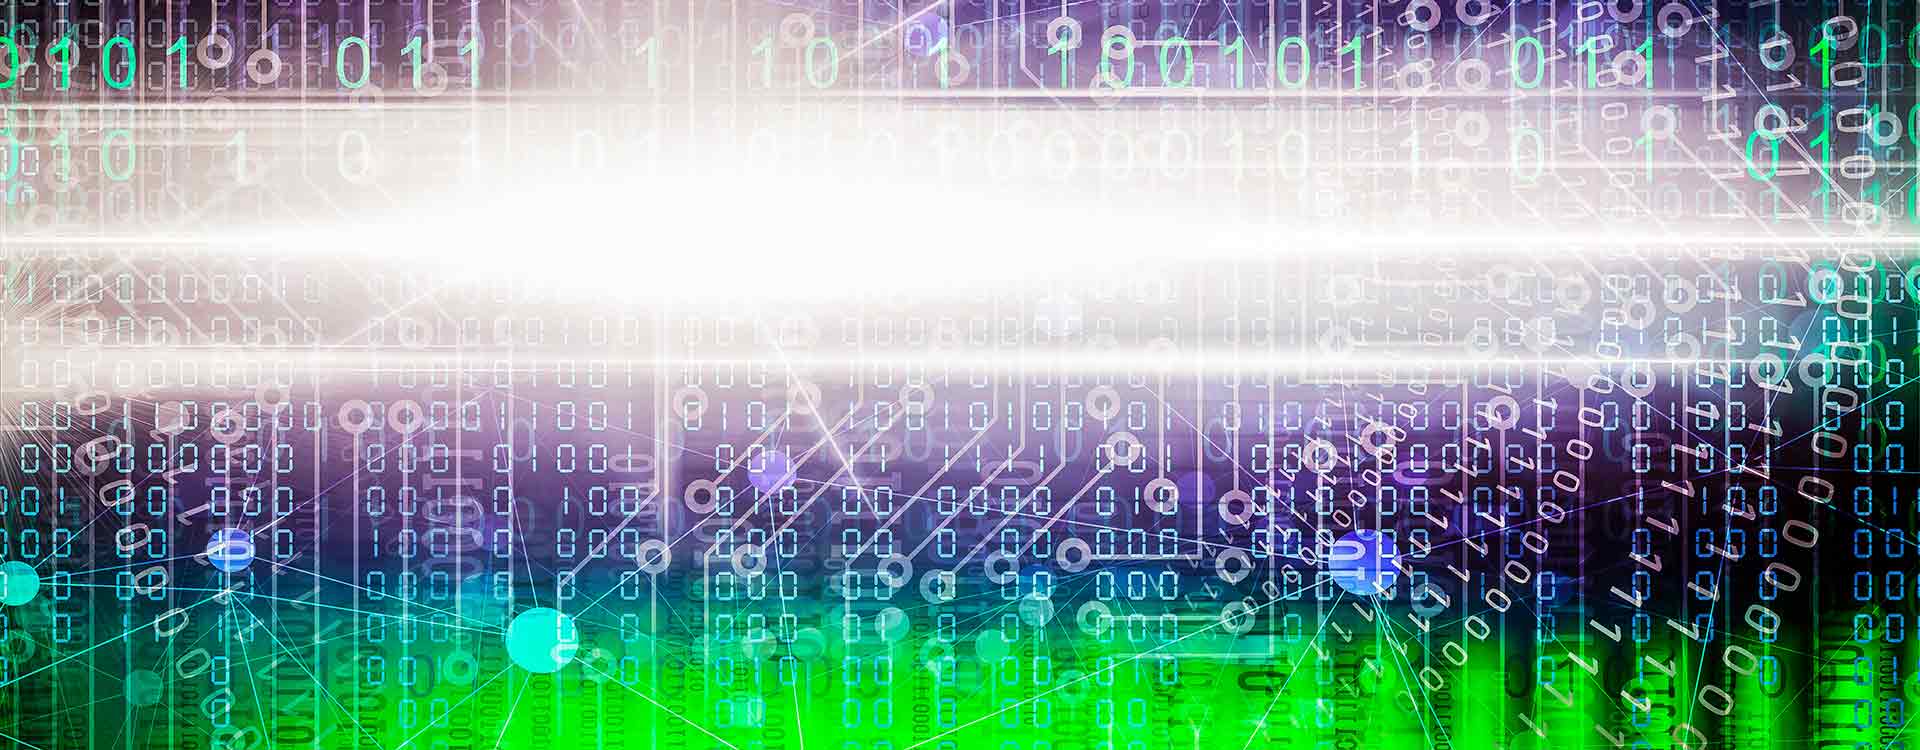 Abstract digital background with a bright white light in the center, overlaid with purple to green gradient numbers representing binary code, suggesting high-tech or cyber data concepts.